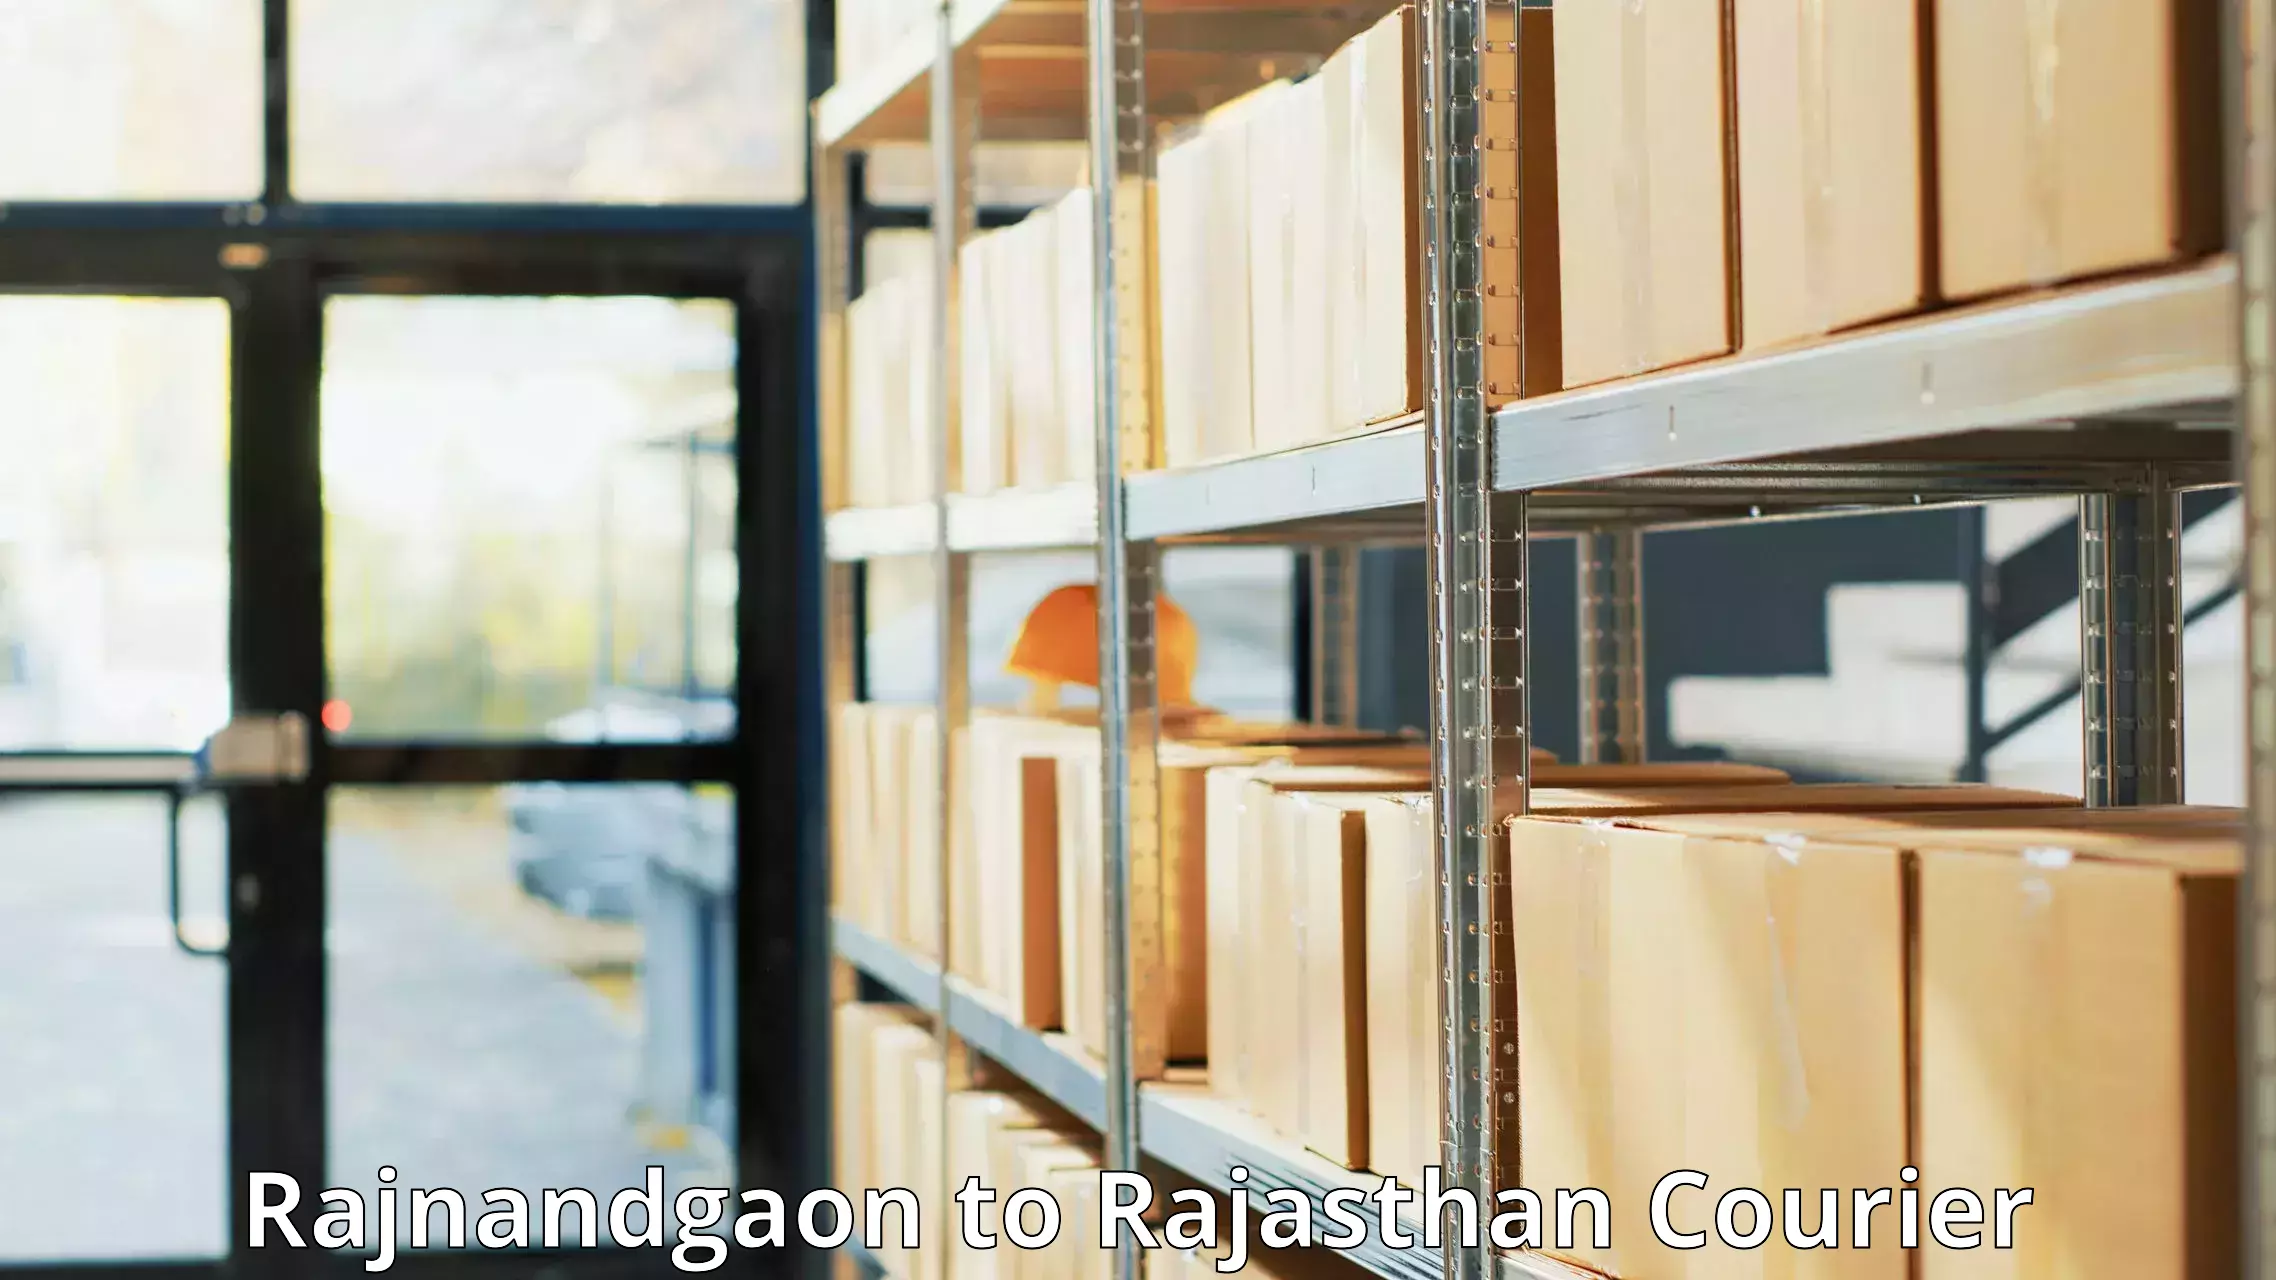 Full-service courier options in Rajnandgaon to Bhilwara